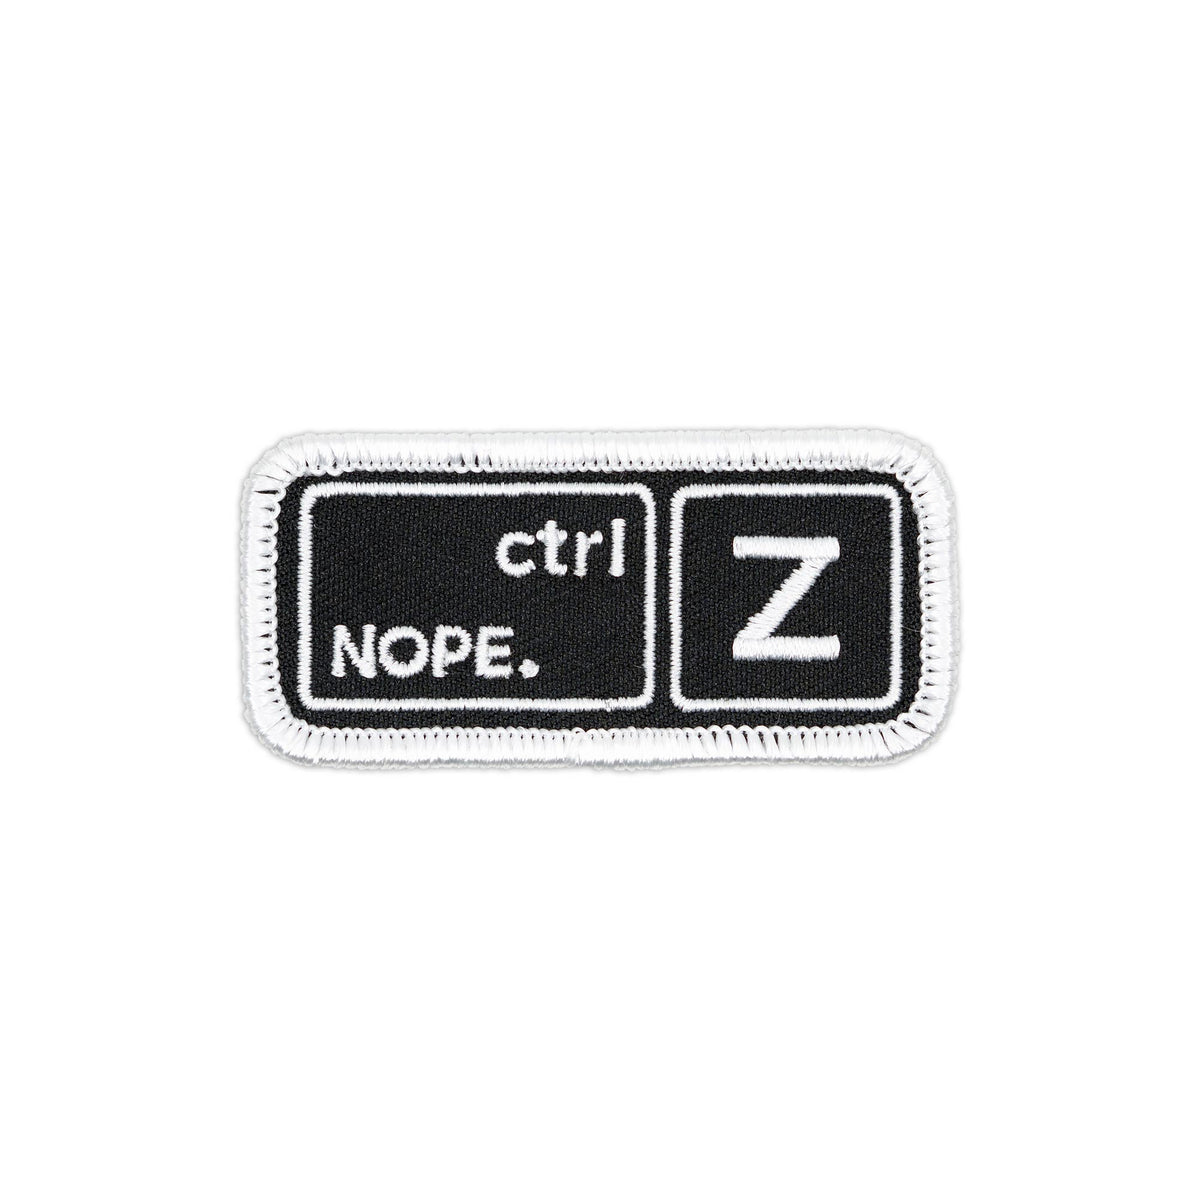 Nope Keyboard Ctrl-Z embroidered iron-on patch